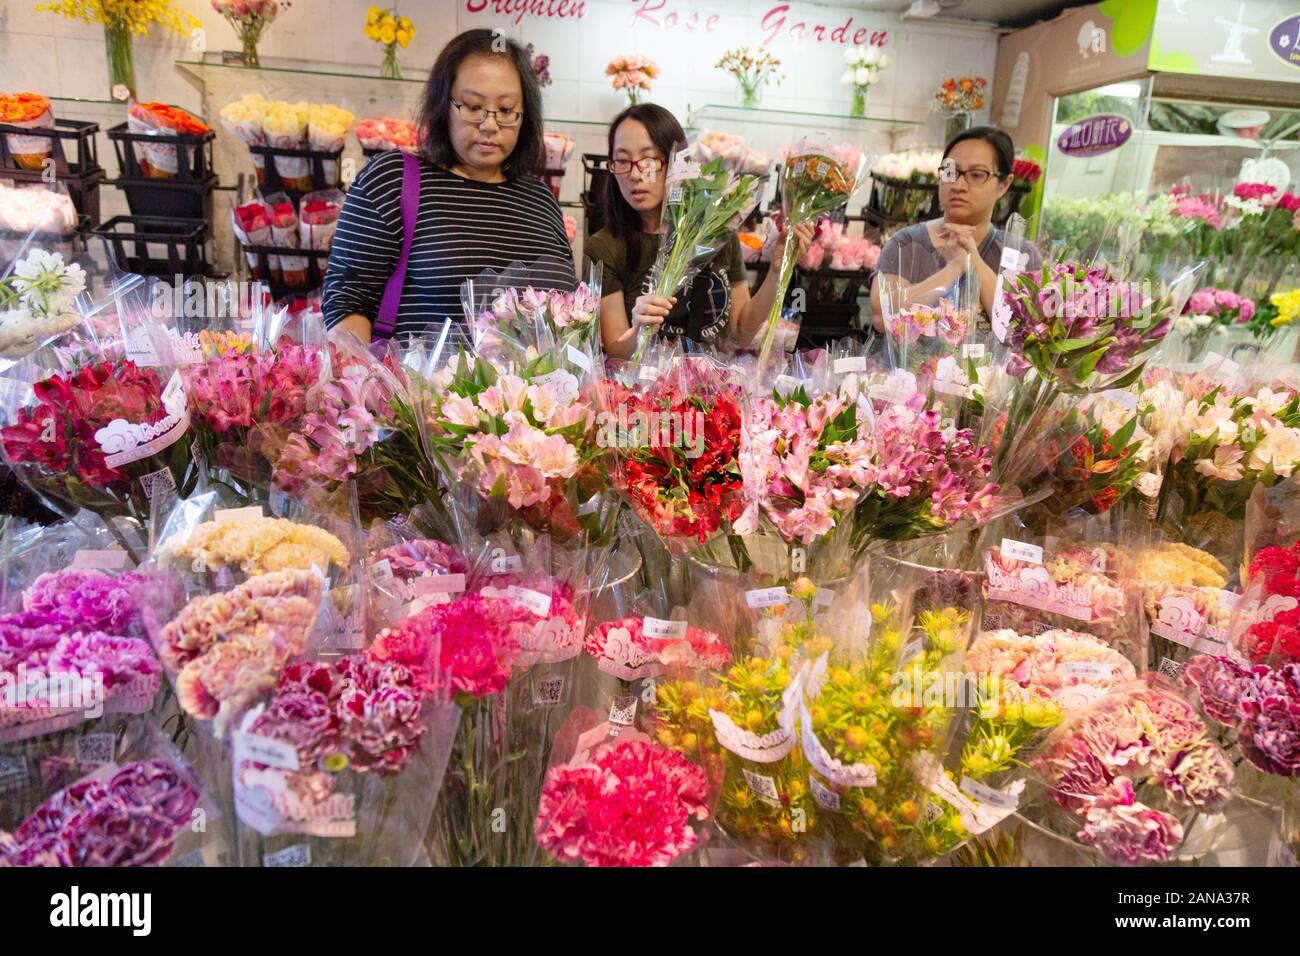 People buying flowers in a flower shop, Hong Kong Flower market, Kowloon, Hong Kong Asia Stock Photo